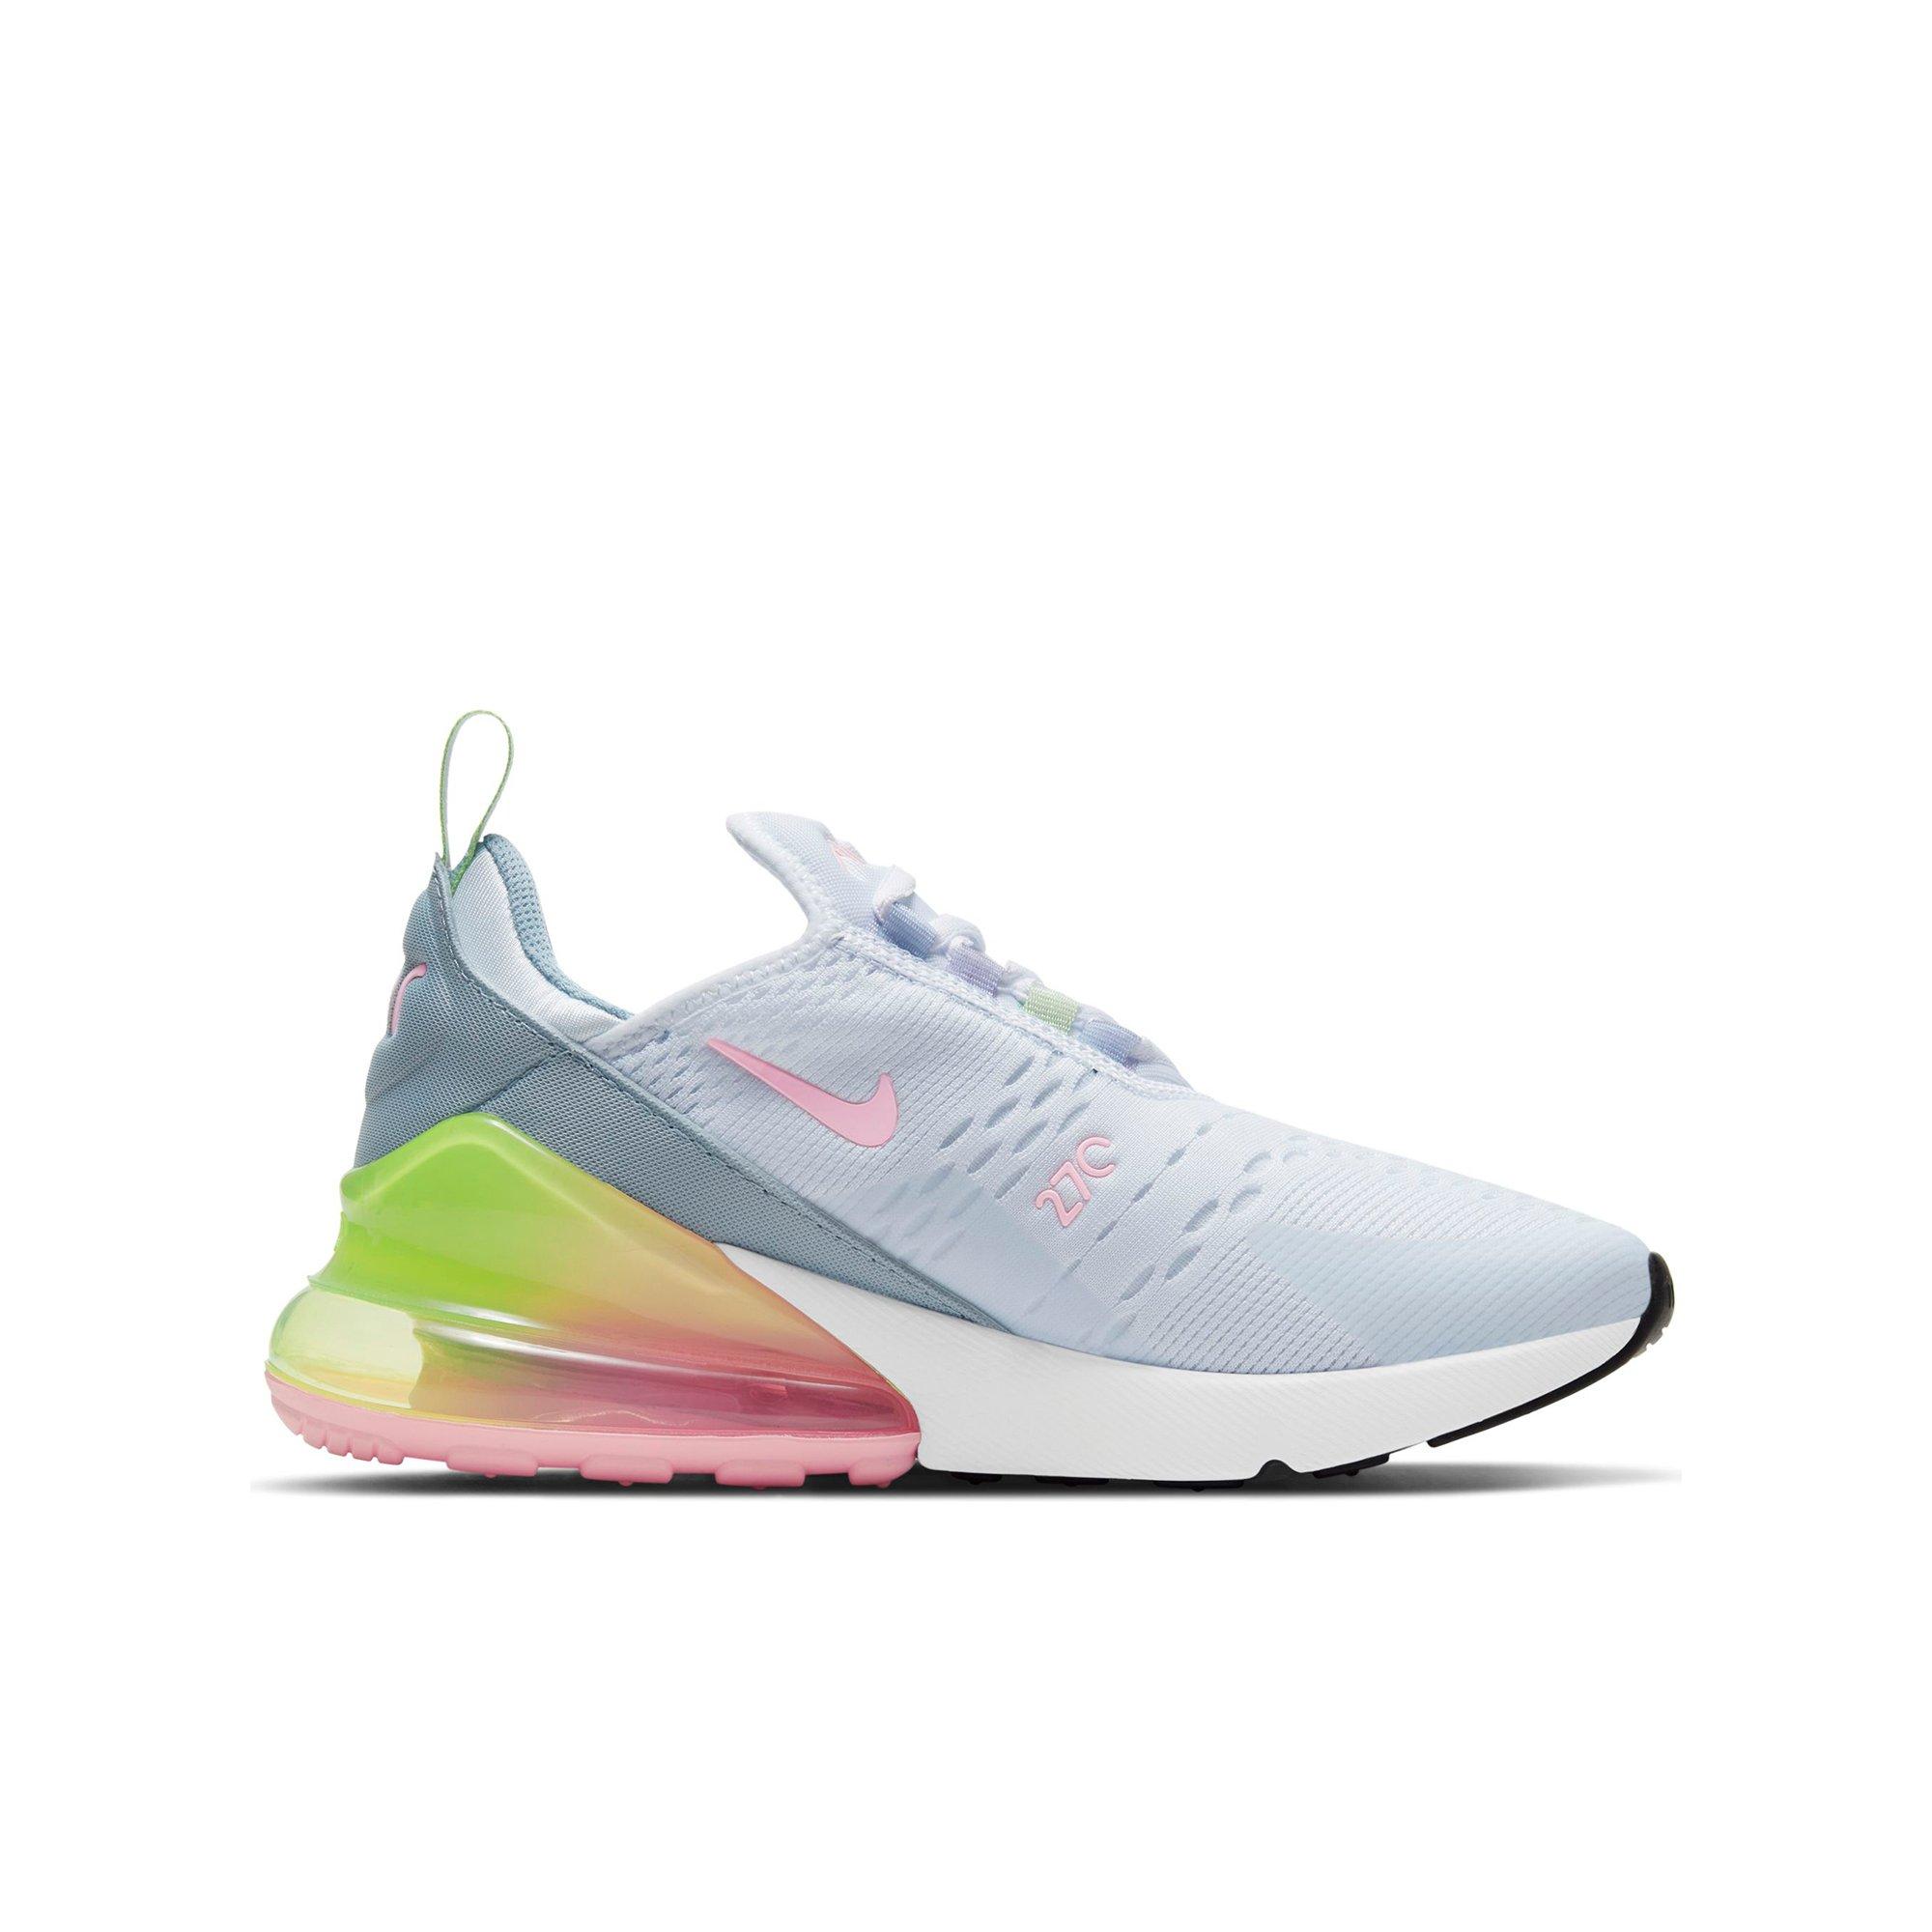 Nike Air Max 270 SE "Move With Grade School Girls' Shoe